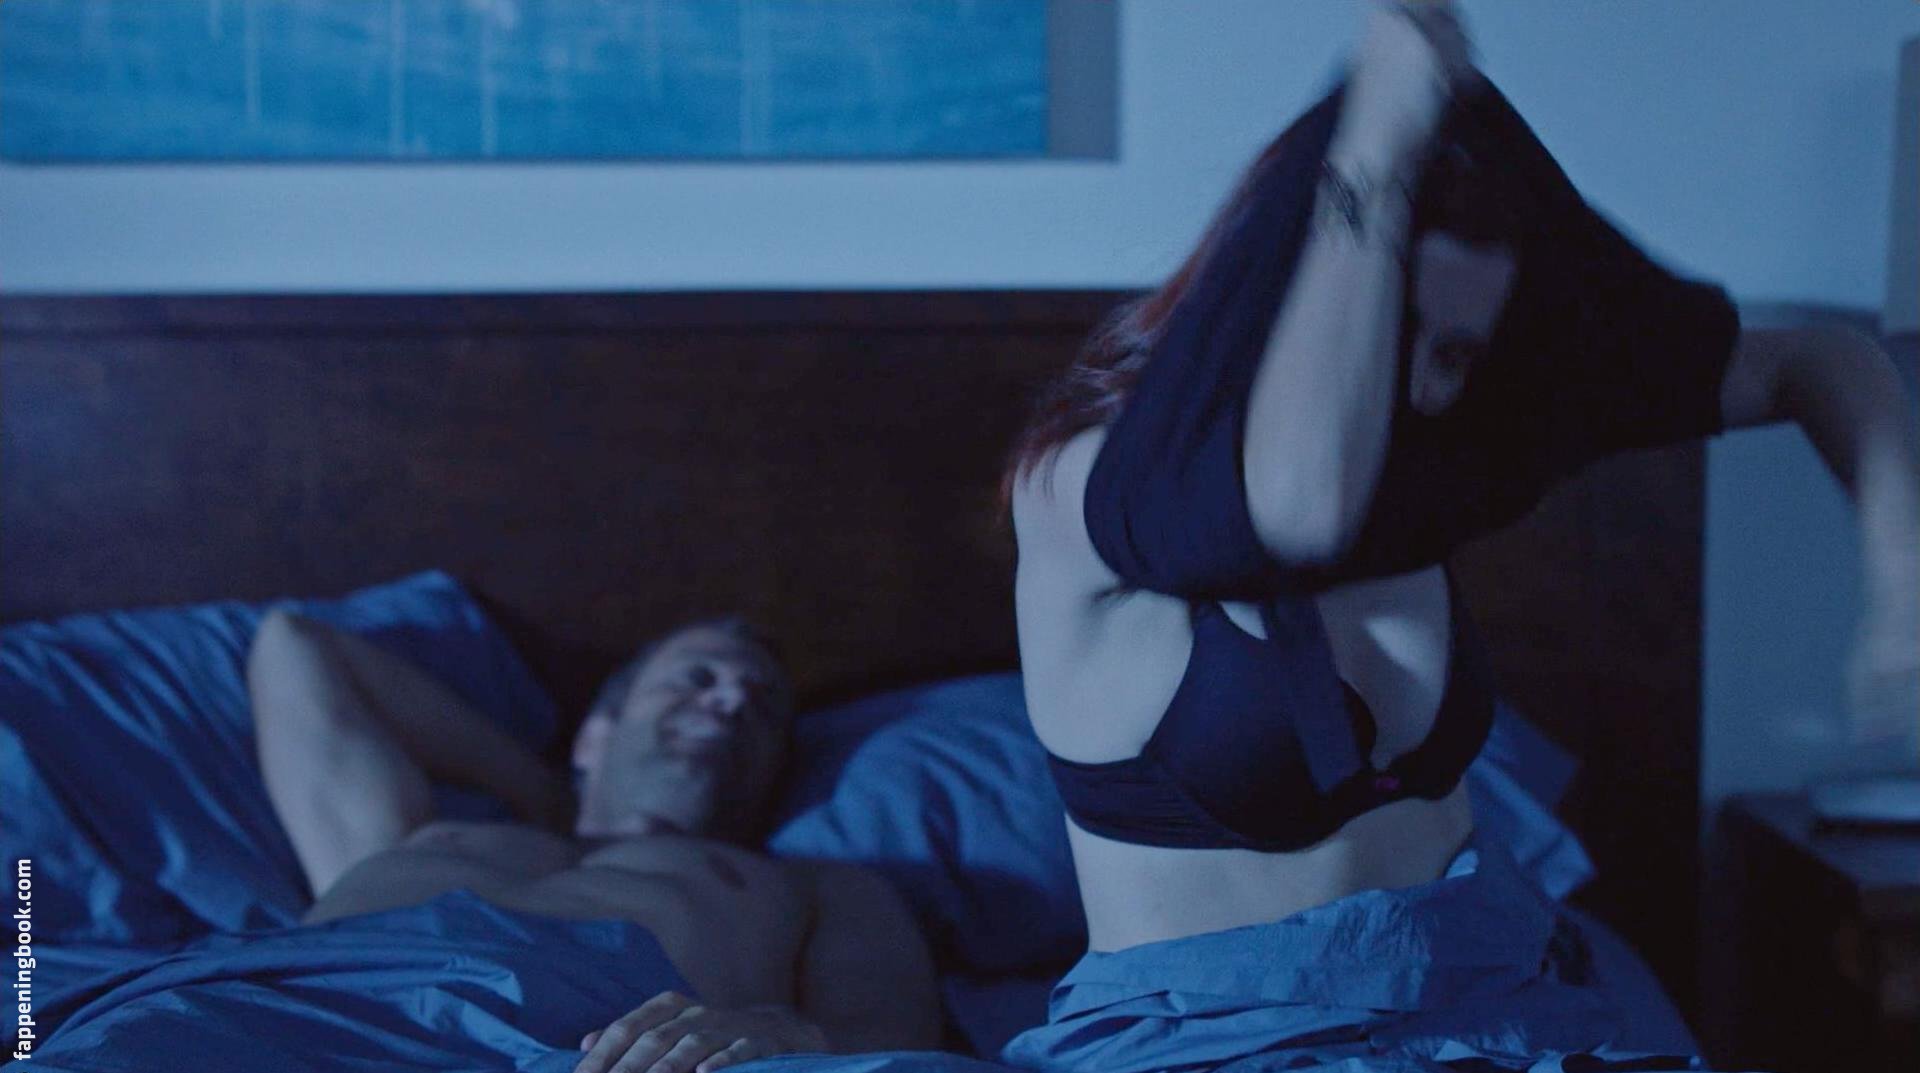 Aya Cash Nude, The Fappening - Photo #60415 - FappeningBook.